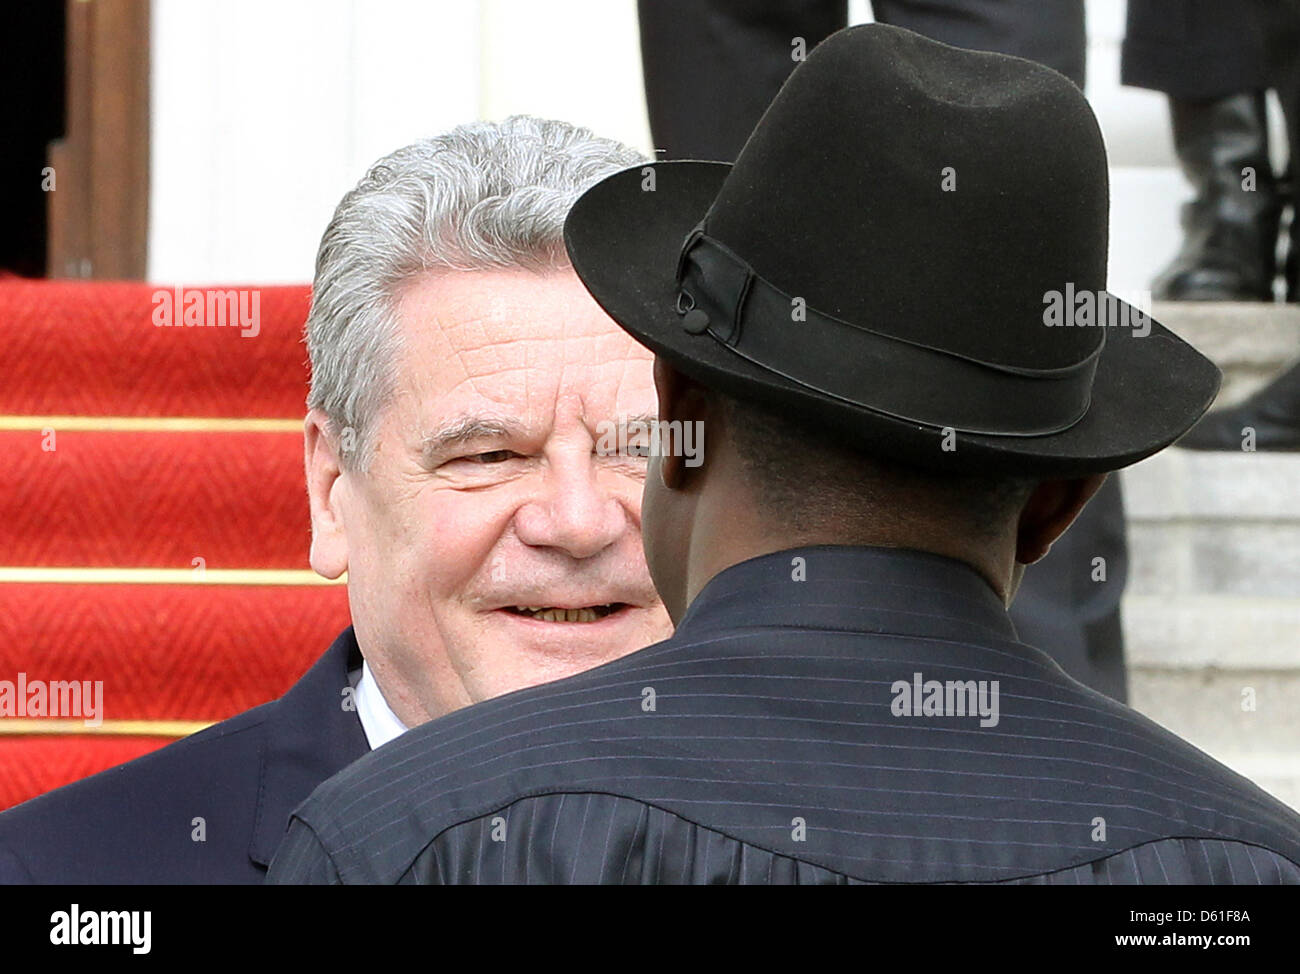 German President Joachim Gauck (L) receives President of Nigeria, Goodluck Ebele Jonathan, at the Bellevue Palace in Berlin, Germany, 20 April 2012. The Nigerian President was greeted with military honour by German Chancellor Angela Merkel one day before and is on a visit to Germany for several days. Photo: Wolfgang Kumm Stock Photo